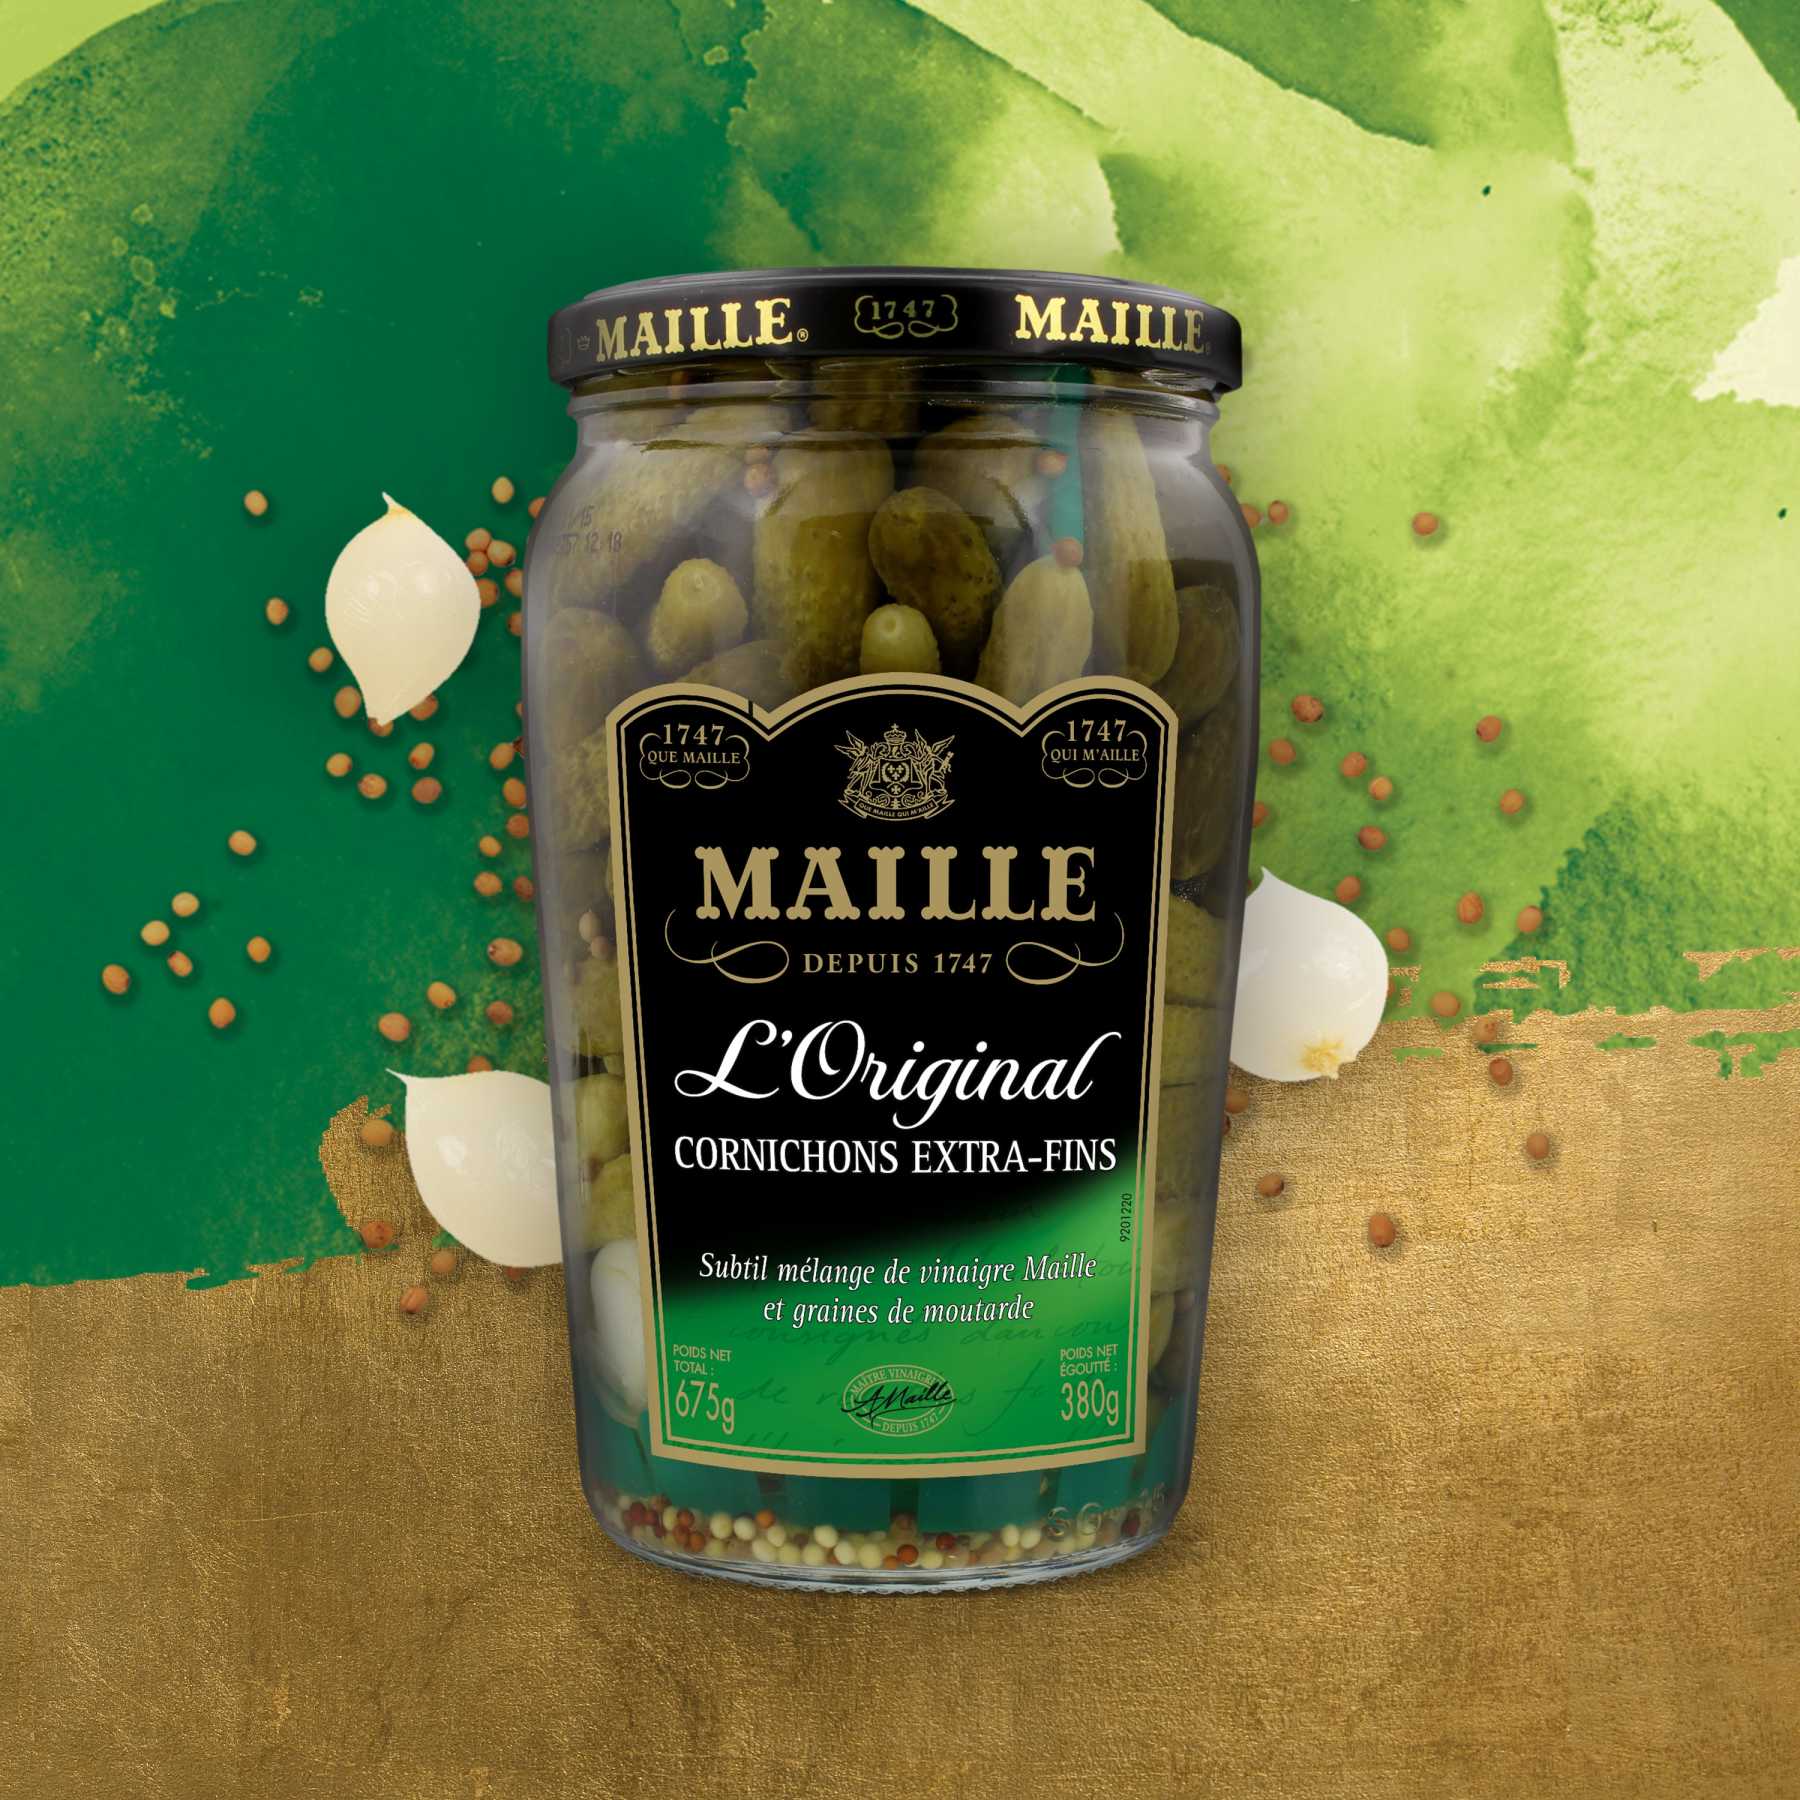 Maille - Cornichons Extra-Fins Bocal 380 g. new visual